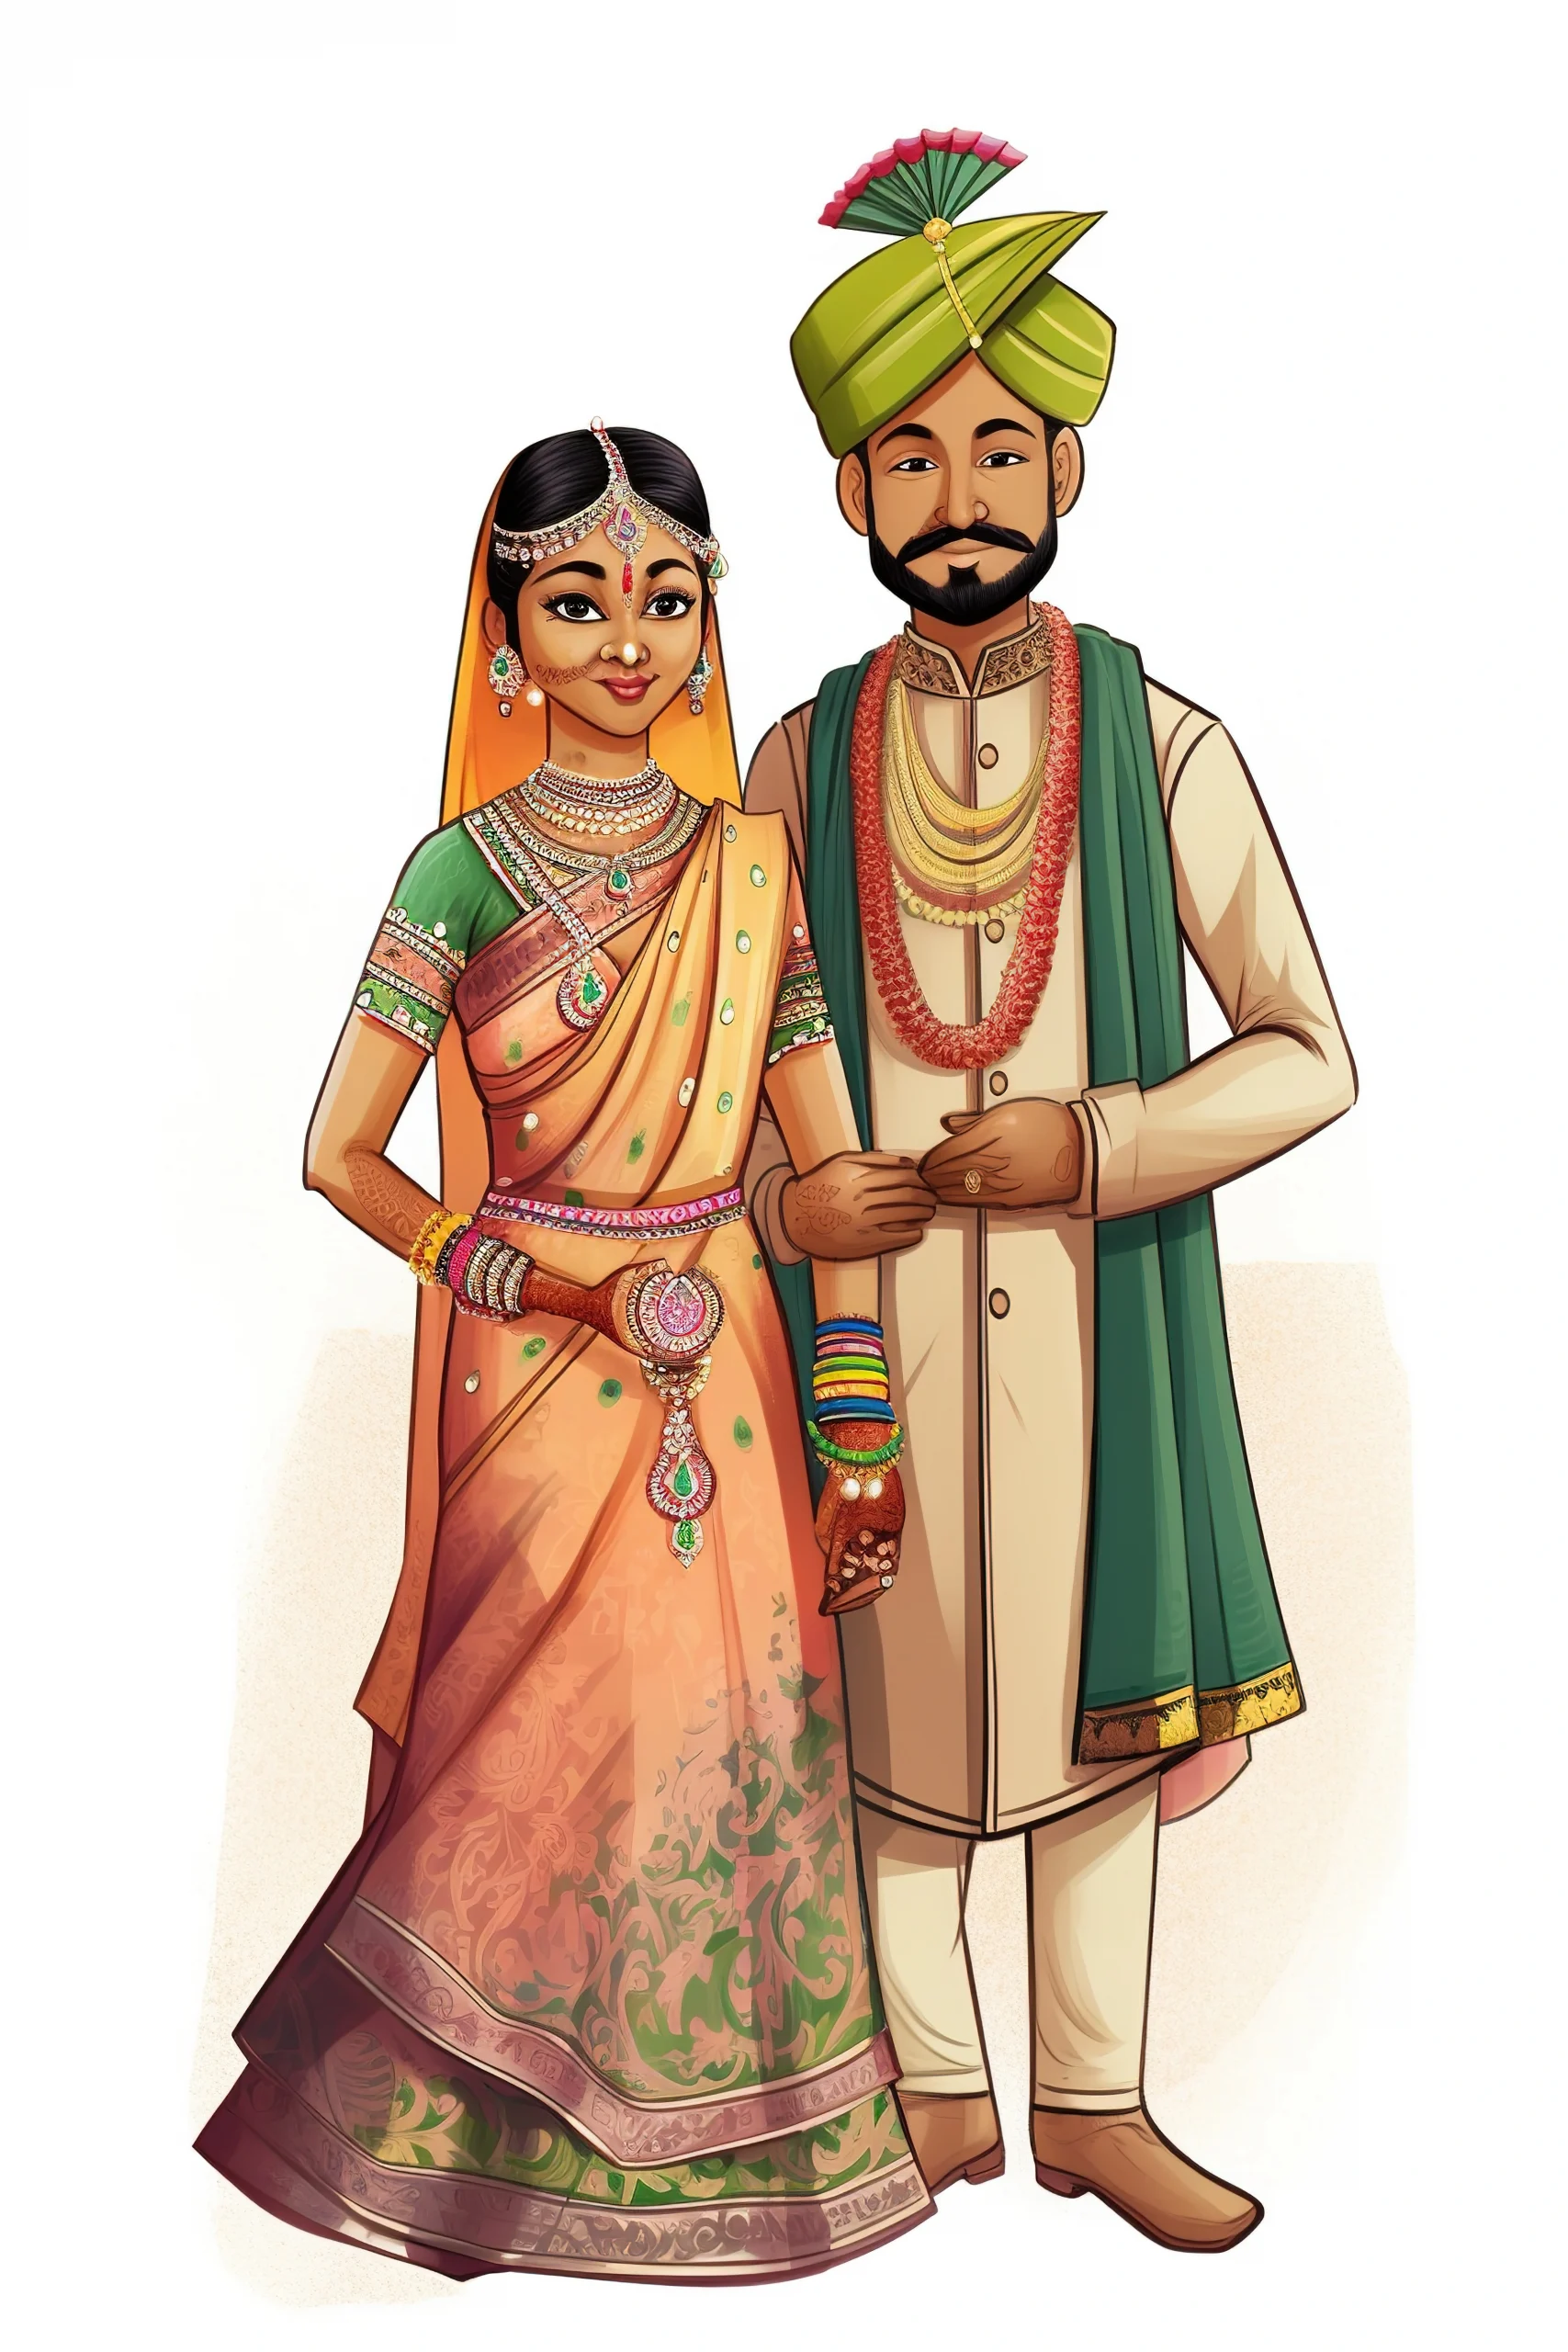 Online Editable Wedding Invitation Cards Free Download India